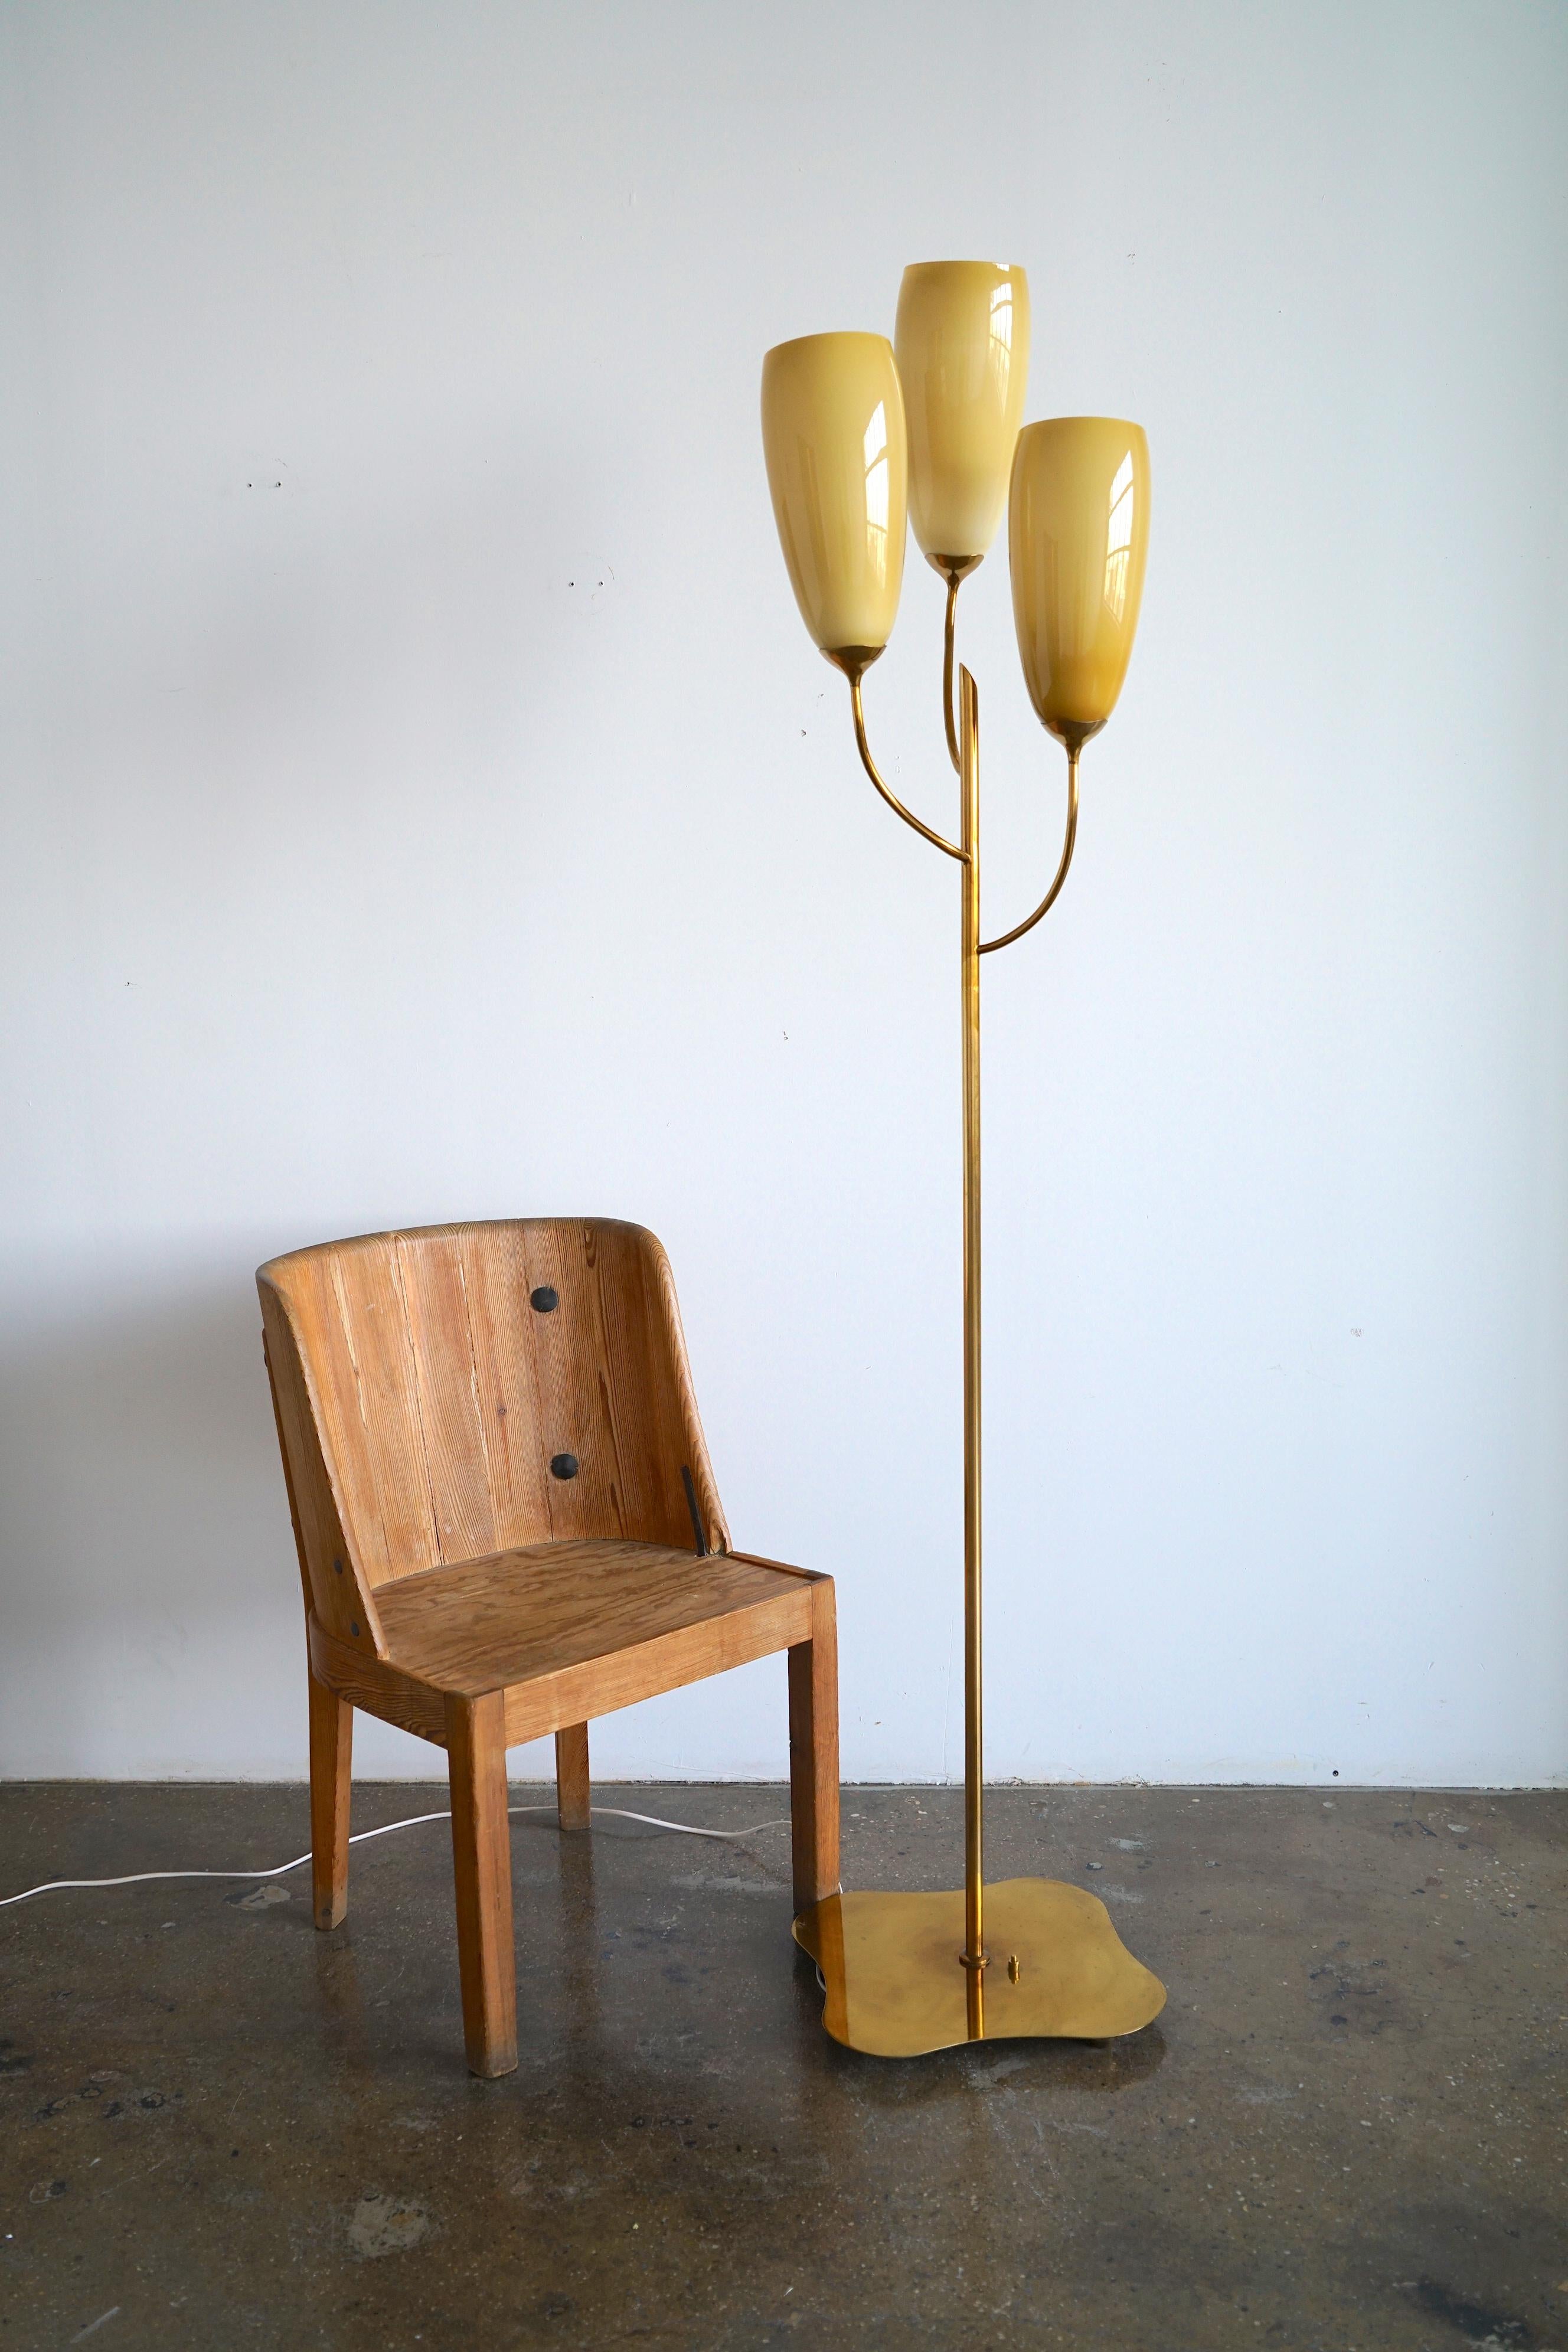 Tall floor lamp produced by Taito Oy, Finland , Circa 1940th.
Custom order, design attributed to Paavo Tynell.
Polished brass with (3) opaline glass shades on free form brass base.
The lamp has existing European candelabra sockets. Dimensions : H